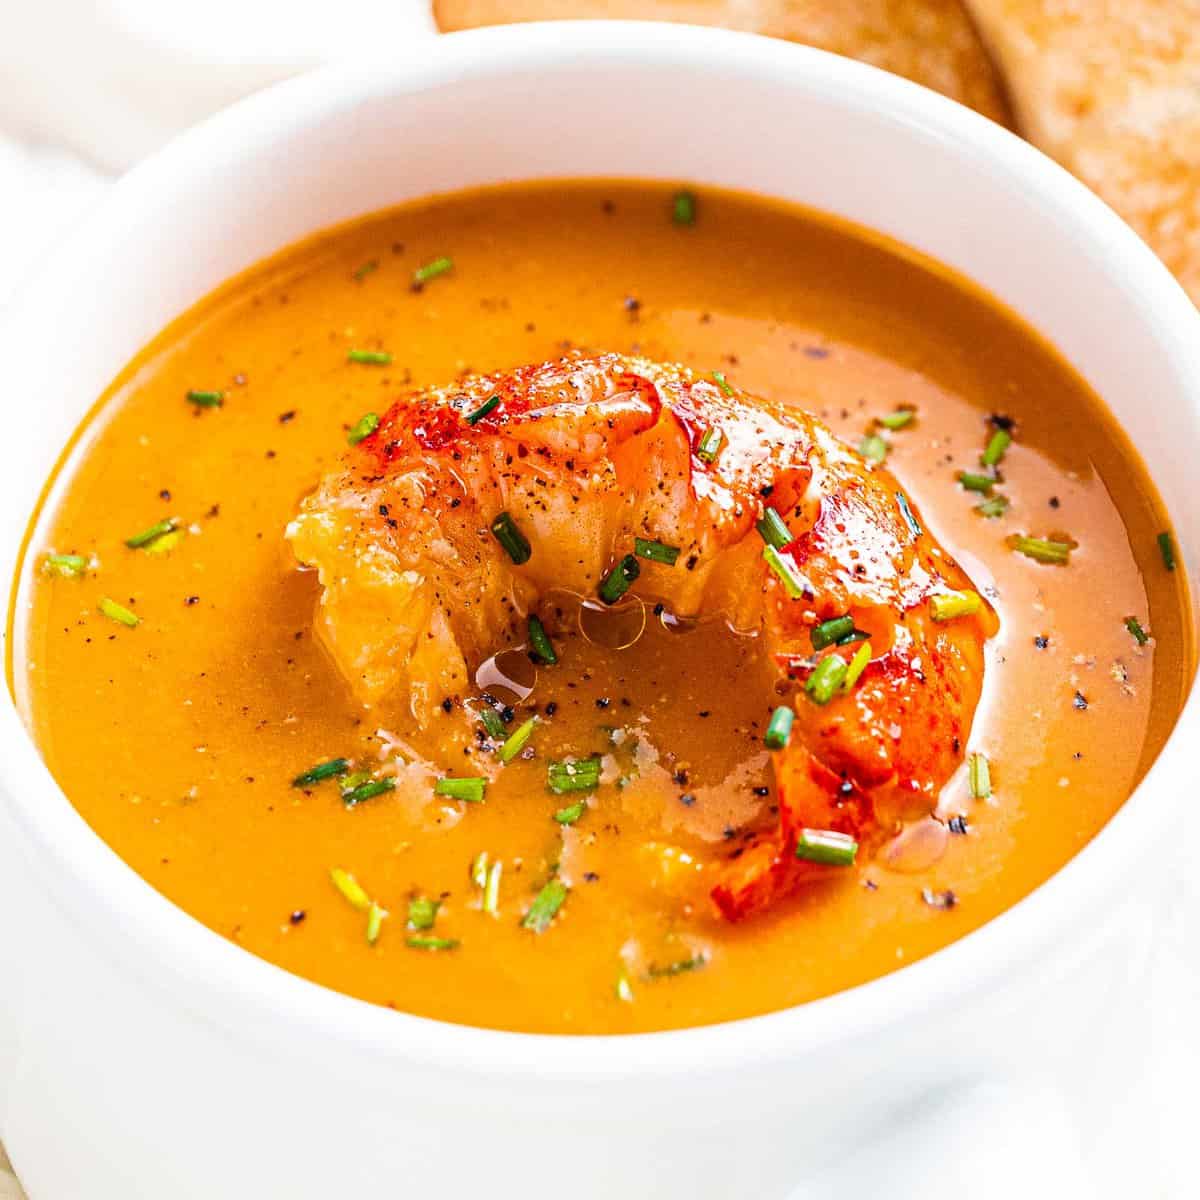 Lobster bisque with lobster tail and chives in a white bowl.